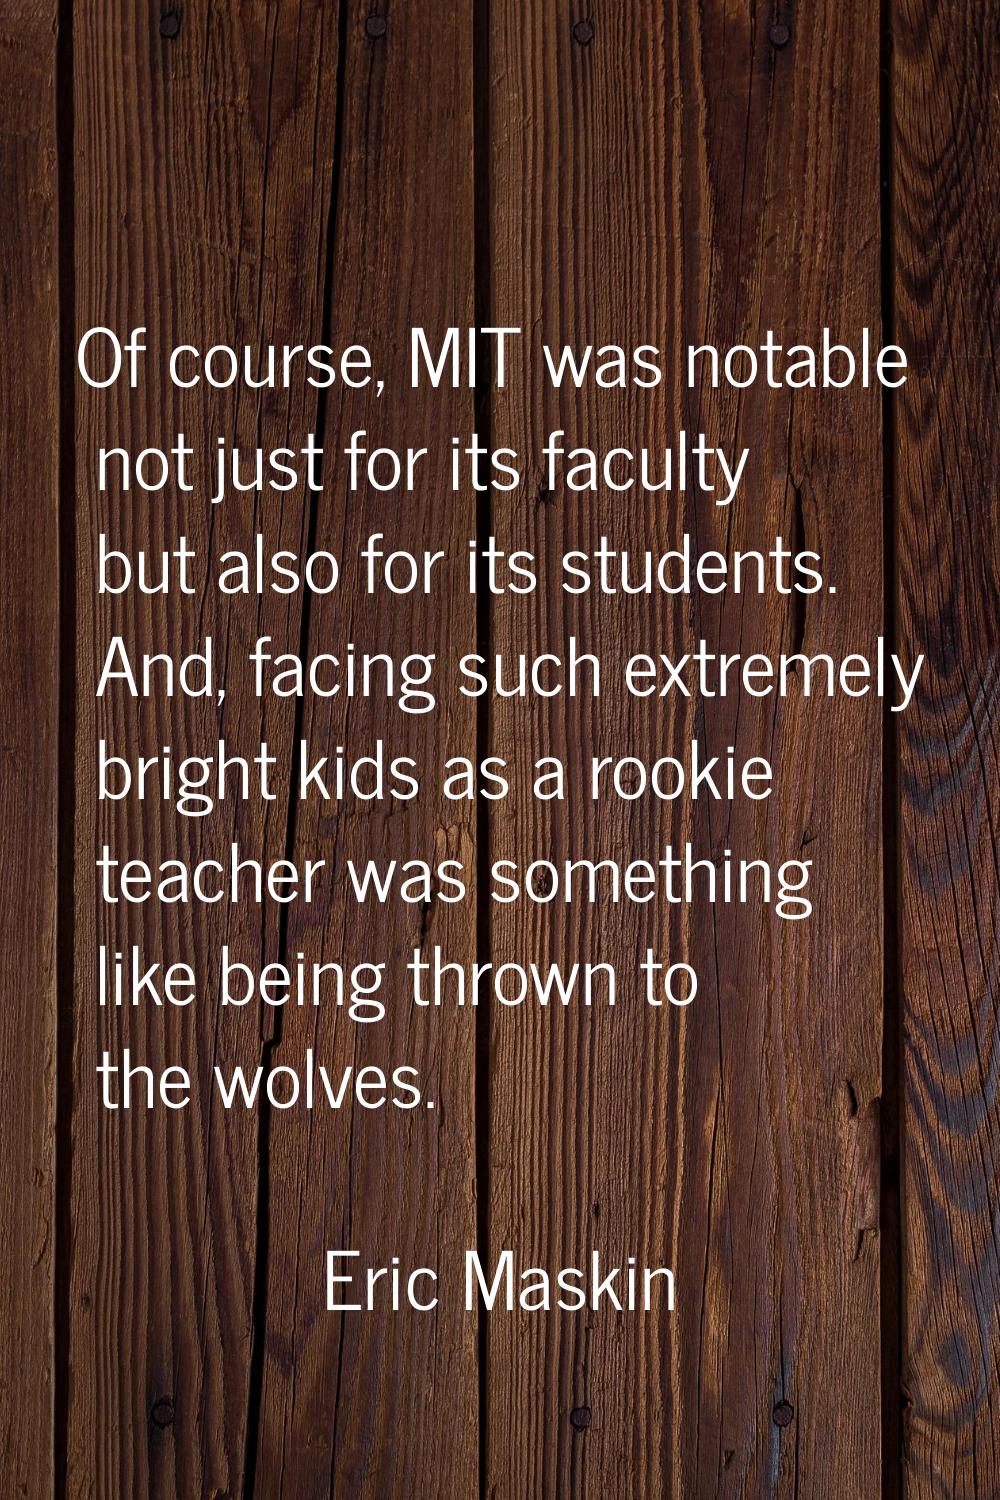 Of course, MIT was notable not just for its faculty but also for its students. And, facing such ext